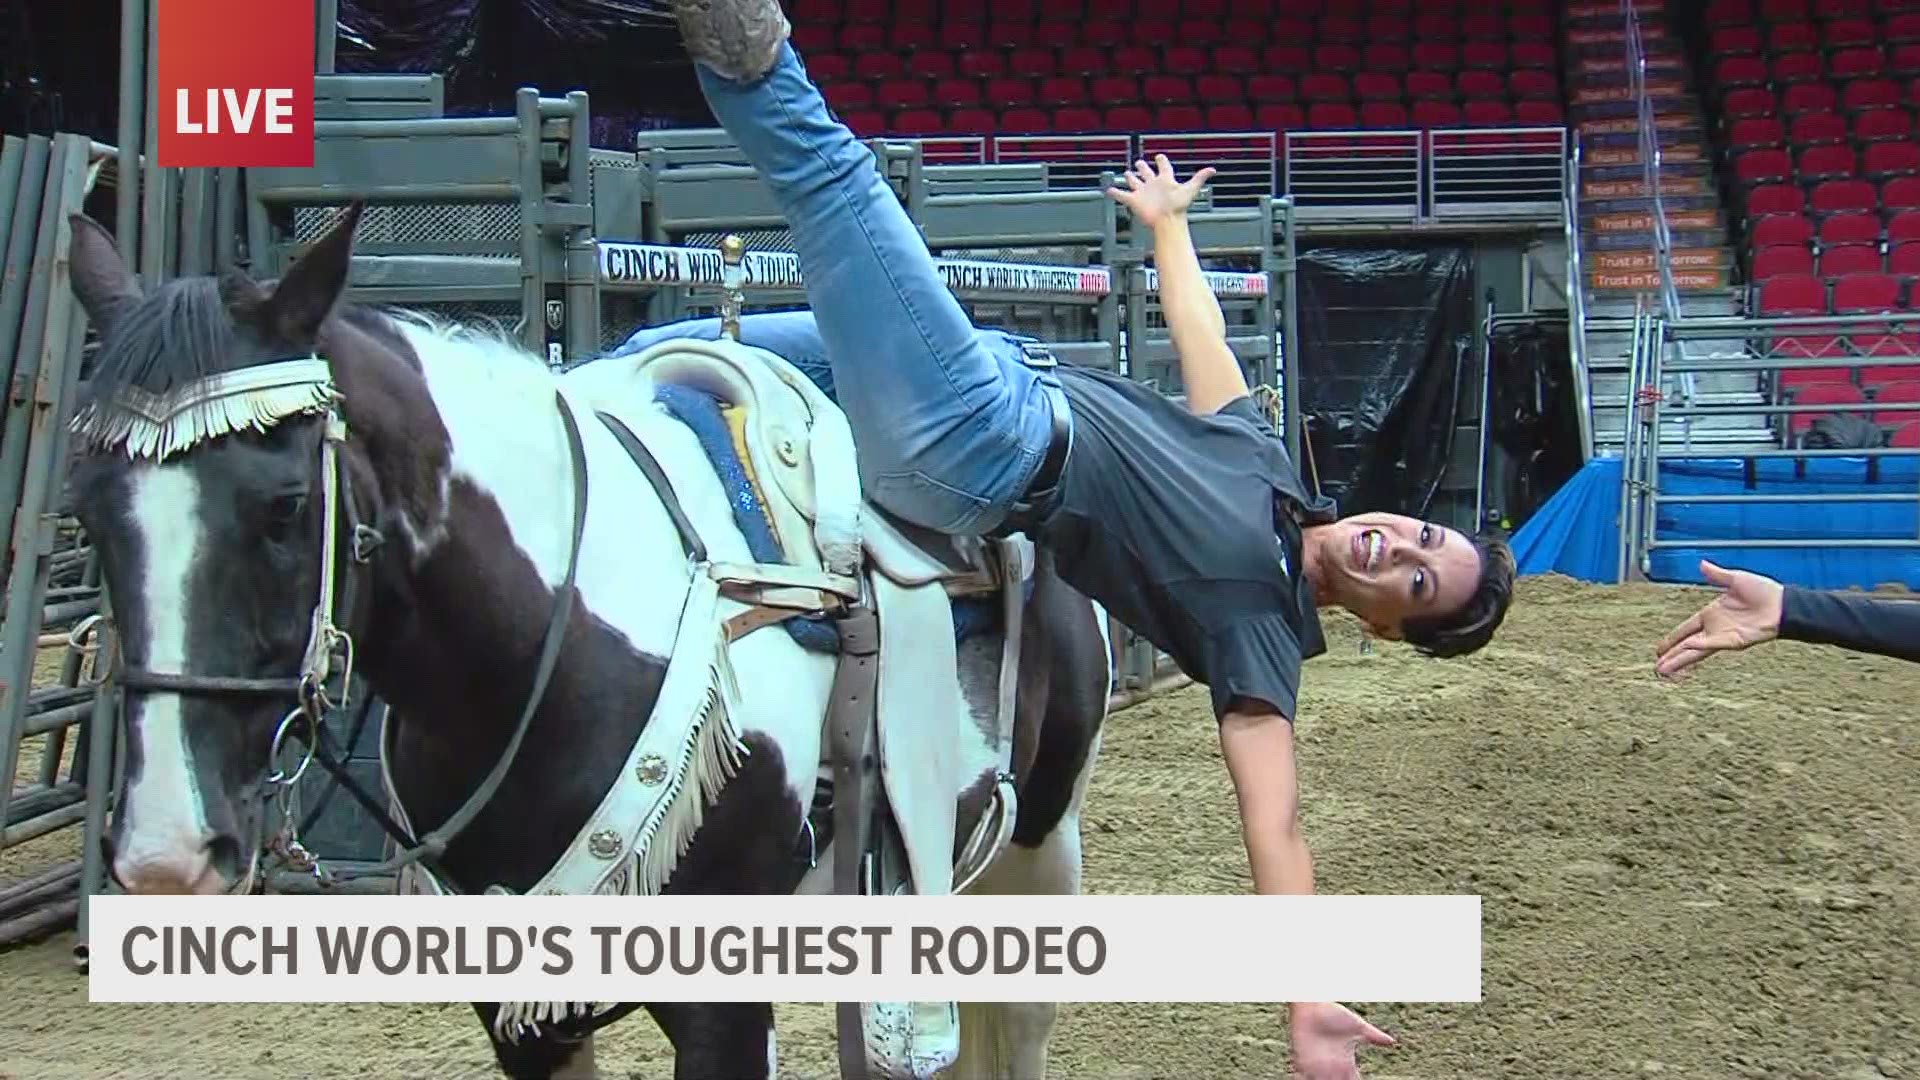 The rodeo returns to Des Moines this weekend